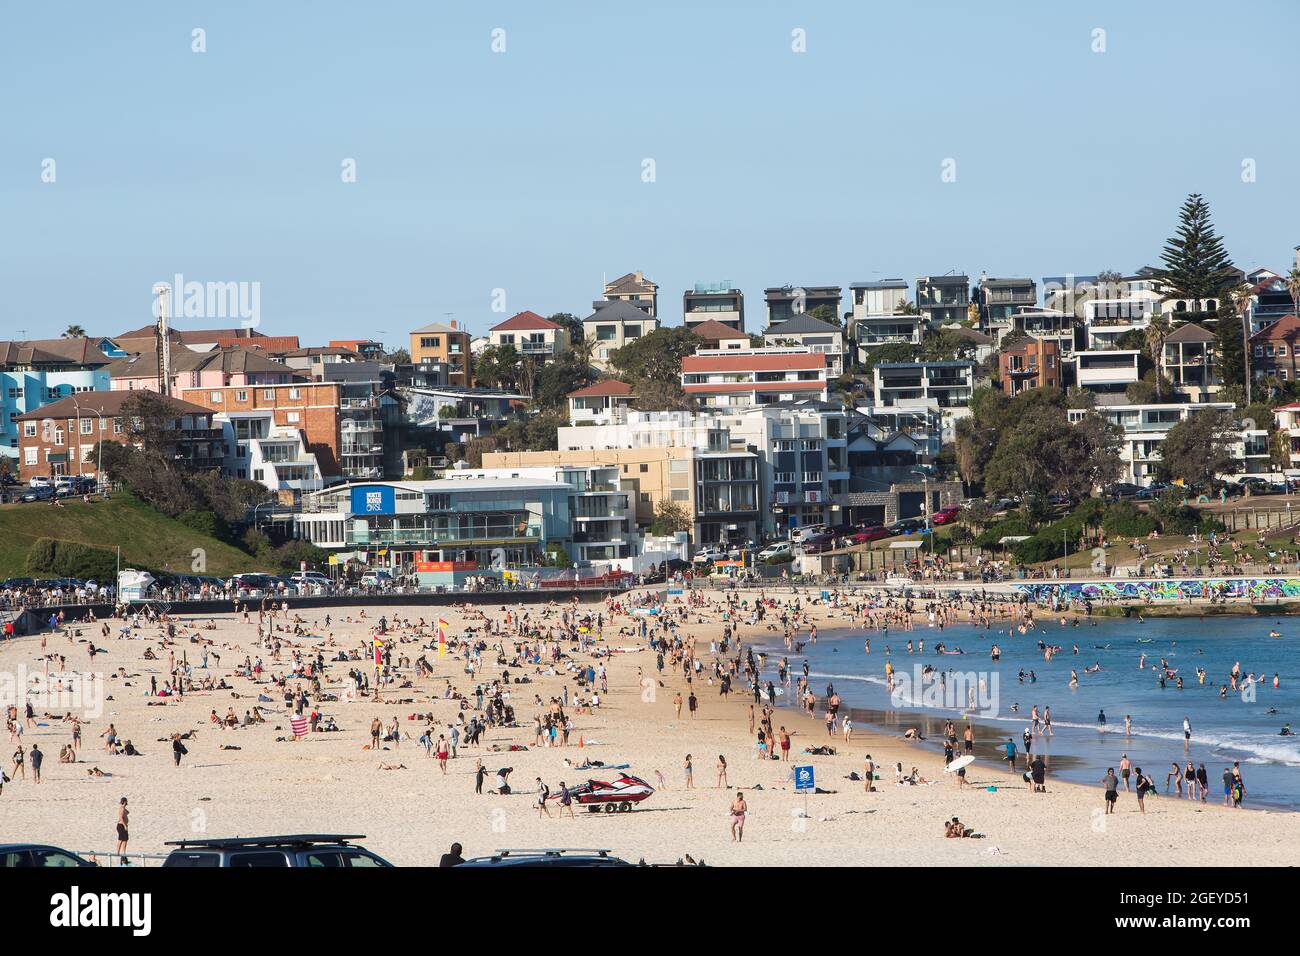 Sydney, Australia. Sunday 22nd August 2021. General views  of  people relaxing on Bondi Beach as winter temperatures reach 25 degress centigrade. The Sydney Lockdown has been extended across greater Sydney until September 30th as COVID-19 Delta Strain case numbers continue to rise. Face masks are now compulsory outdoors across NSW unless exercising. Credit: Paul Lovelace/Alamy Live News Stock Photo